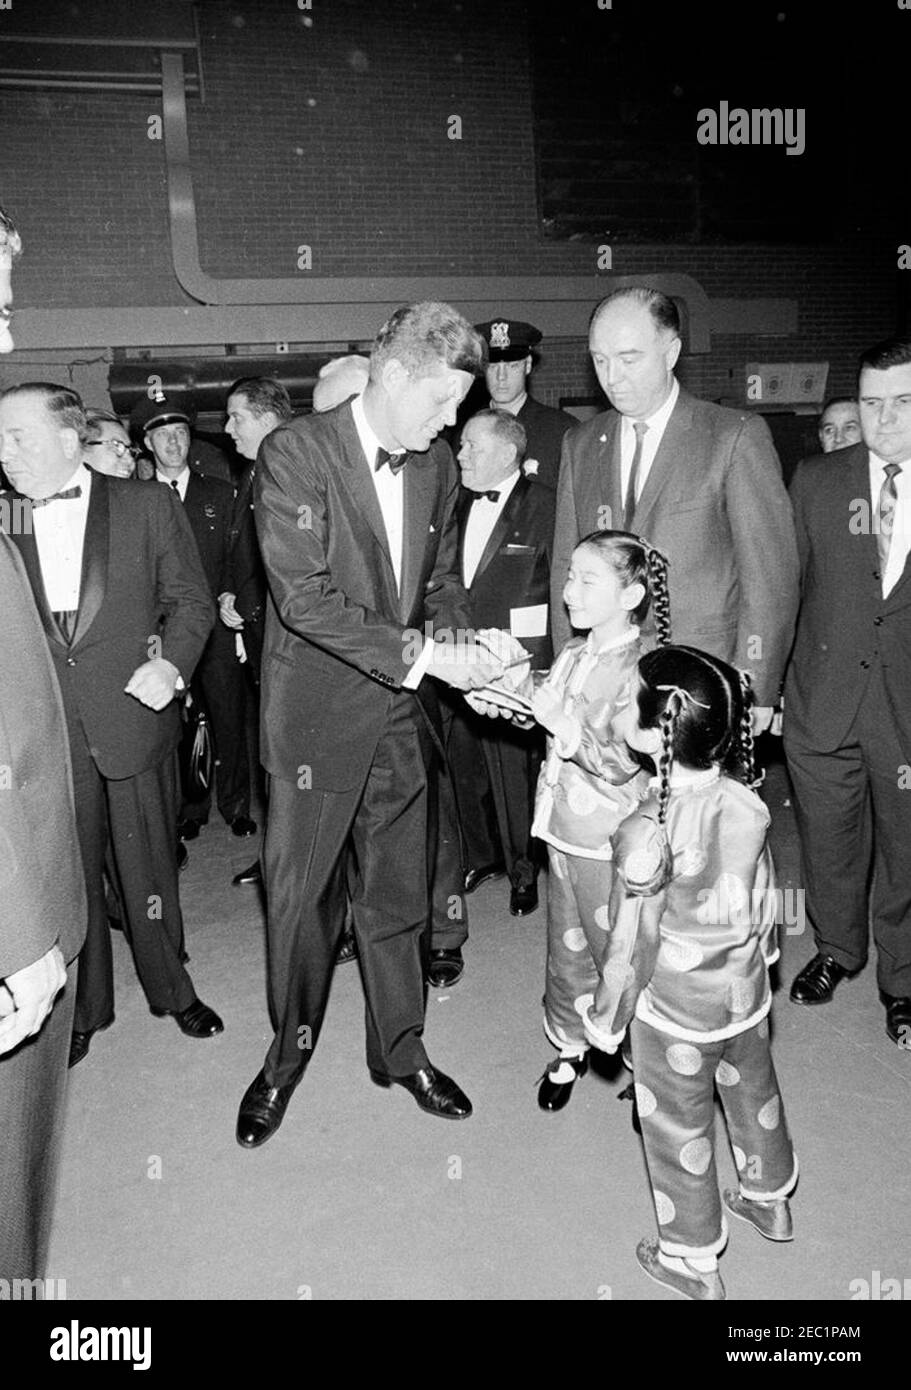 Congressional campaign trip: Chicago, Illinois, arrival, motorcade, address to Cook County Democratic Dinner, address at Aerie Crown Theater. President John F. Kennedy signs an autograph for a young girl outside of McCormick Place in Chicago, Illinois, prior to attending a Cook County Democratic dinner during a congressional campaign trip. Mayor of Chicago, Richard J. Daley, stands at left. Stock Photo